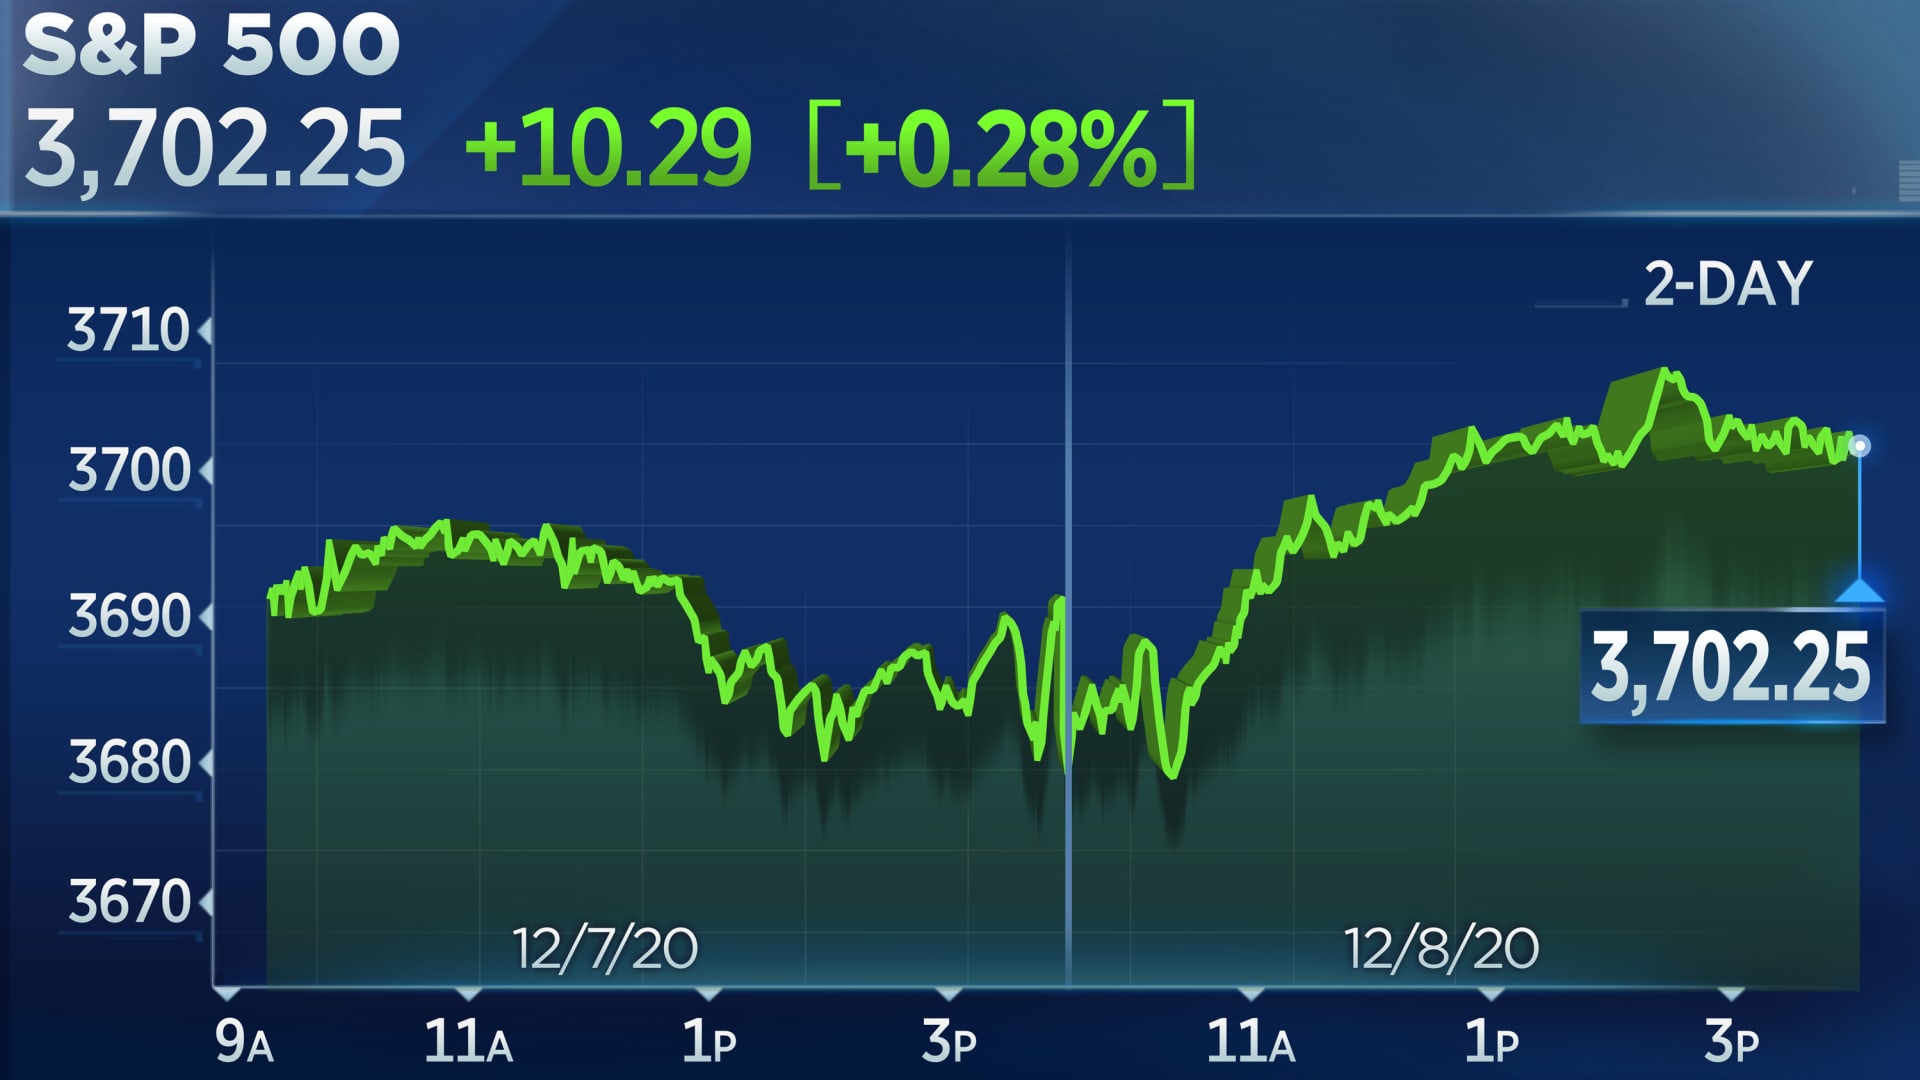 Stocks rise to record highs, S&P 500 closes above 3,700 for the first time